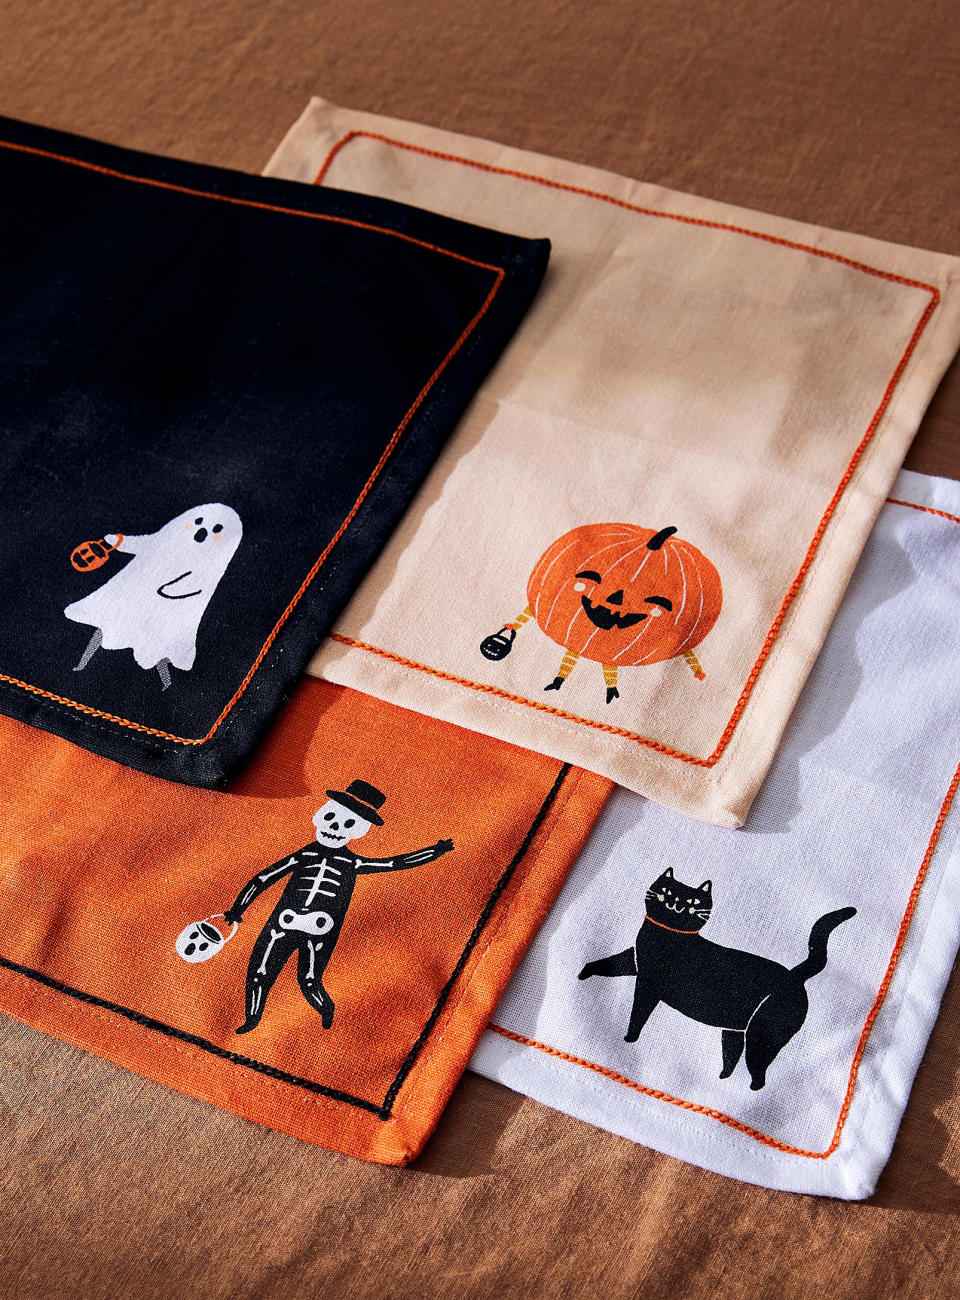 four halloween napkins overlapping each other on a table